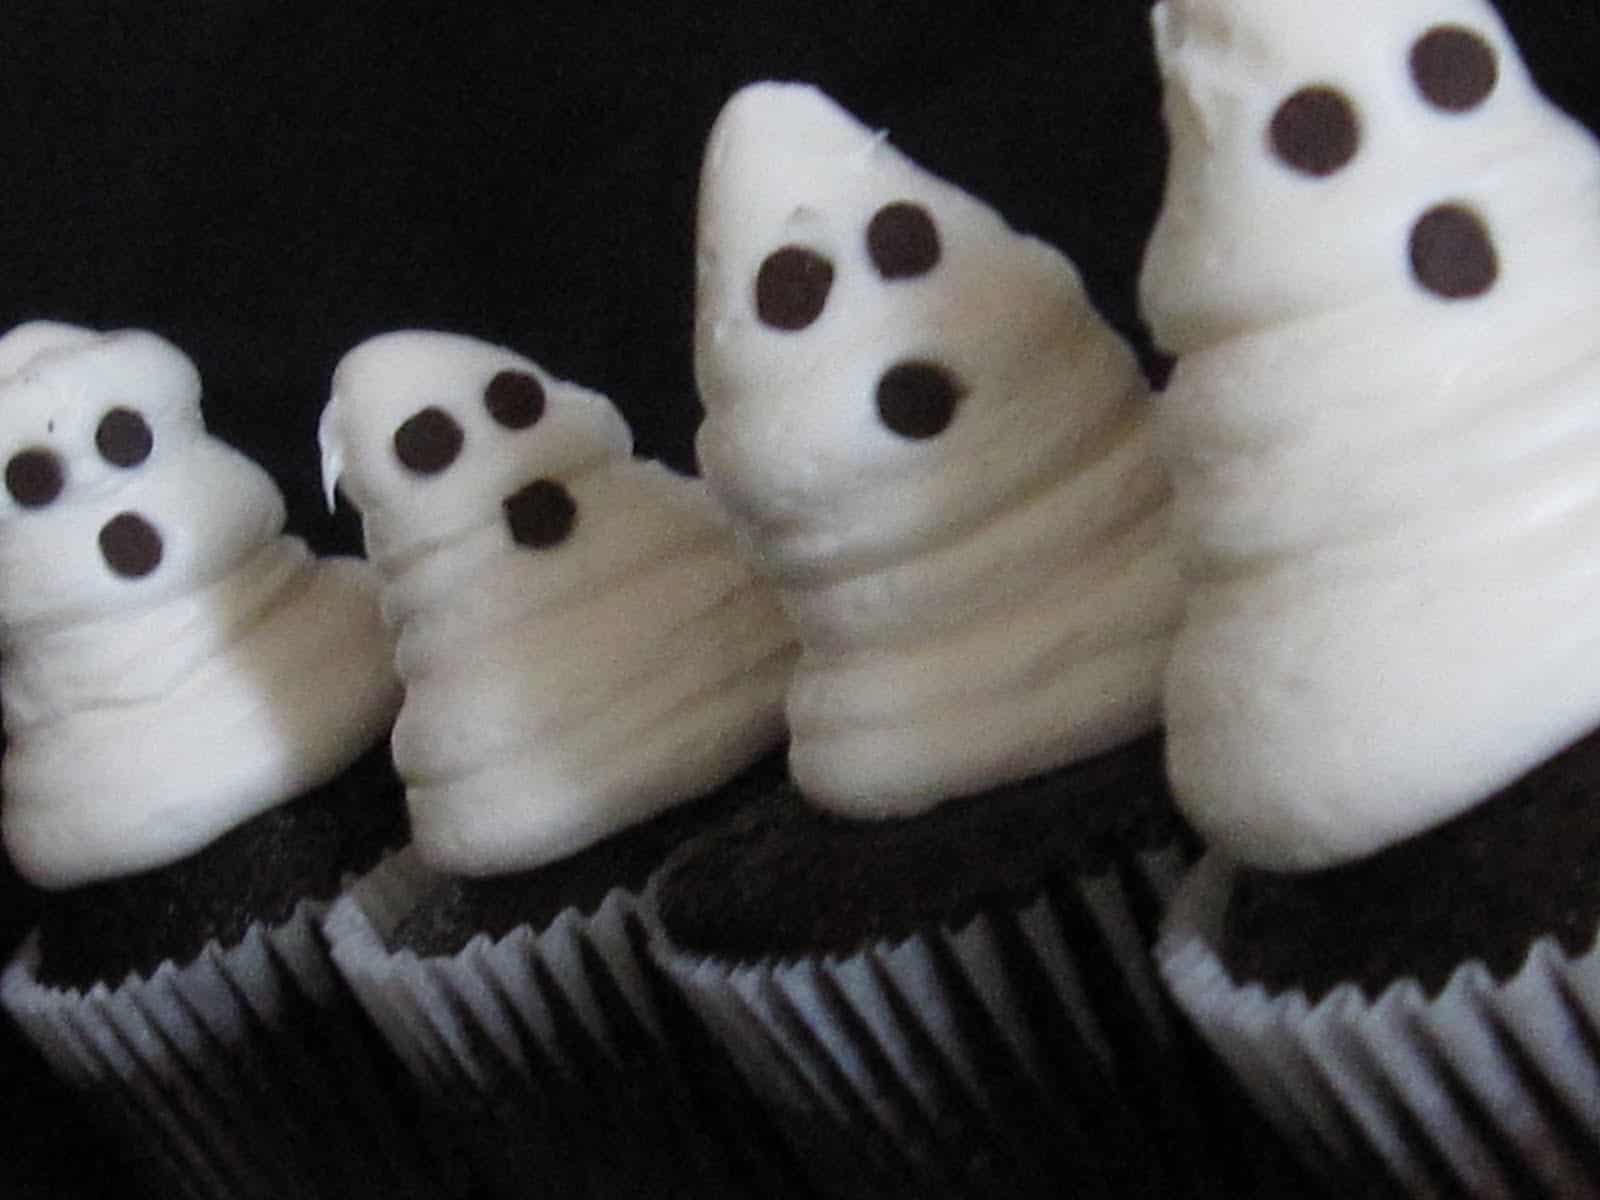 Close-up of chocolate cupcakes with vanilla frosting decorated like ghosts